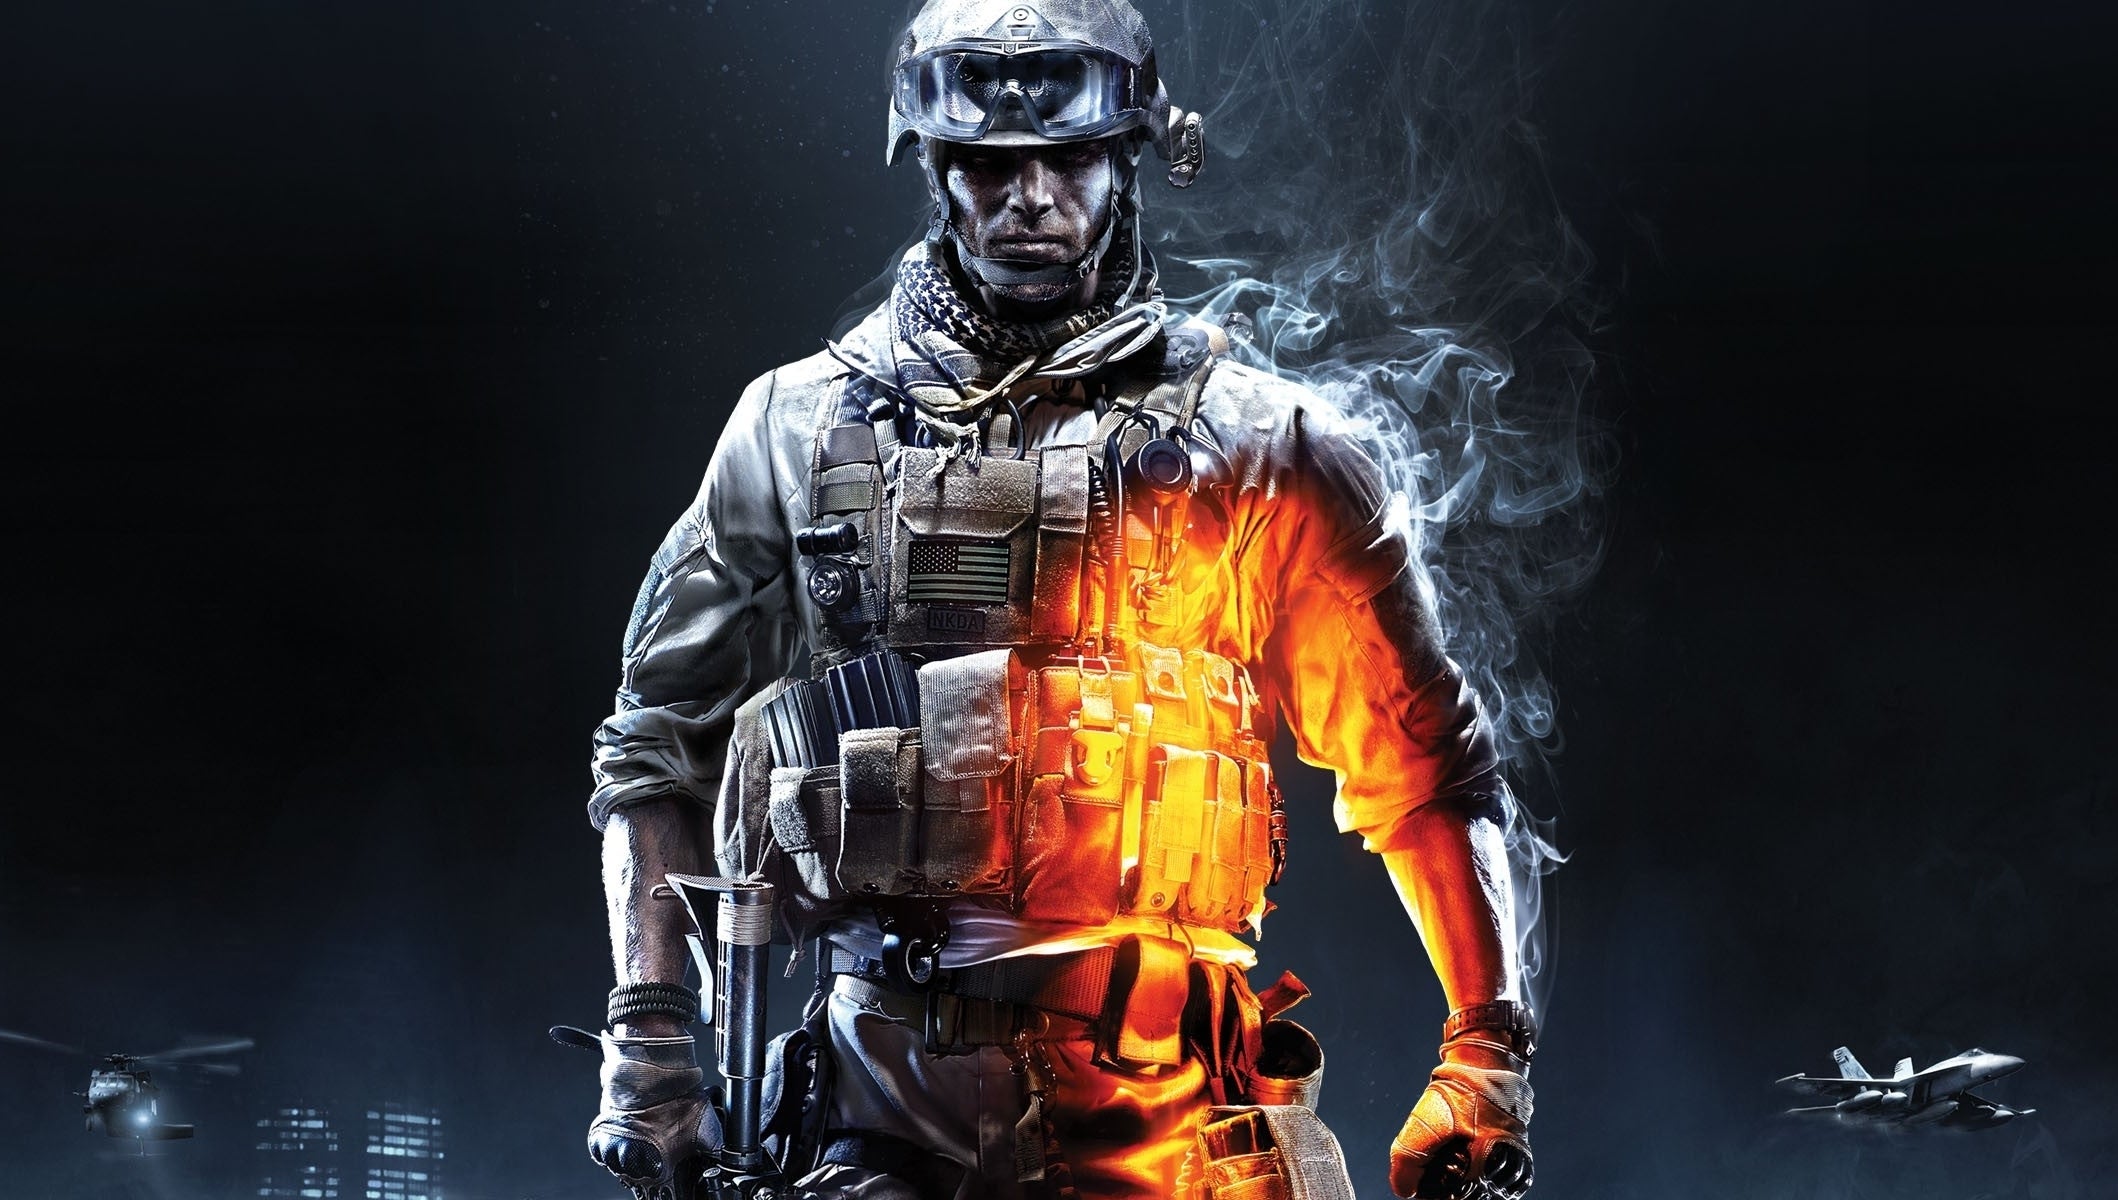 Image for Battlefield 3 is free to anybody with Amazon Prime